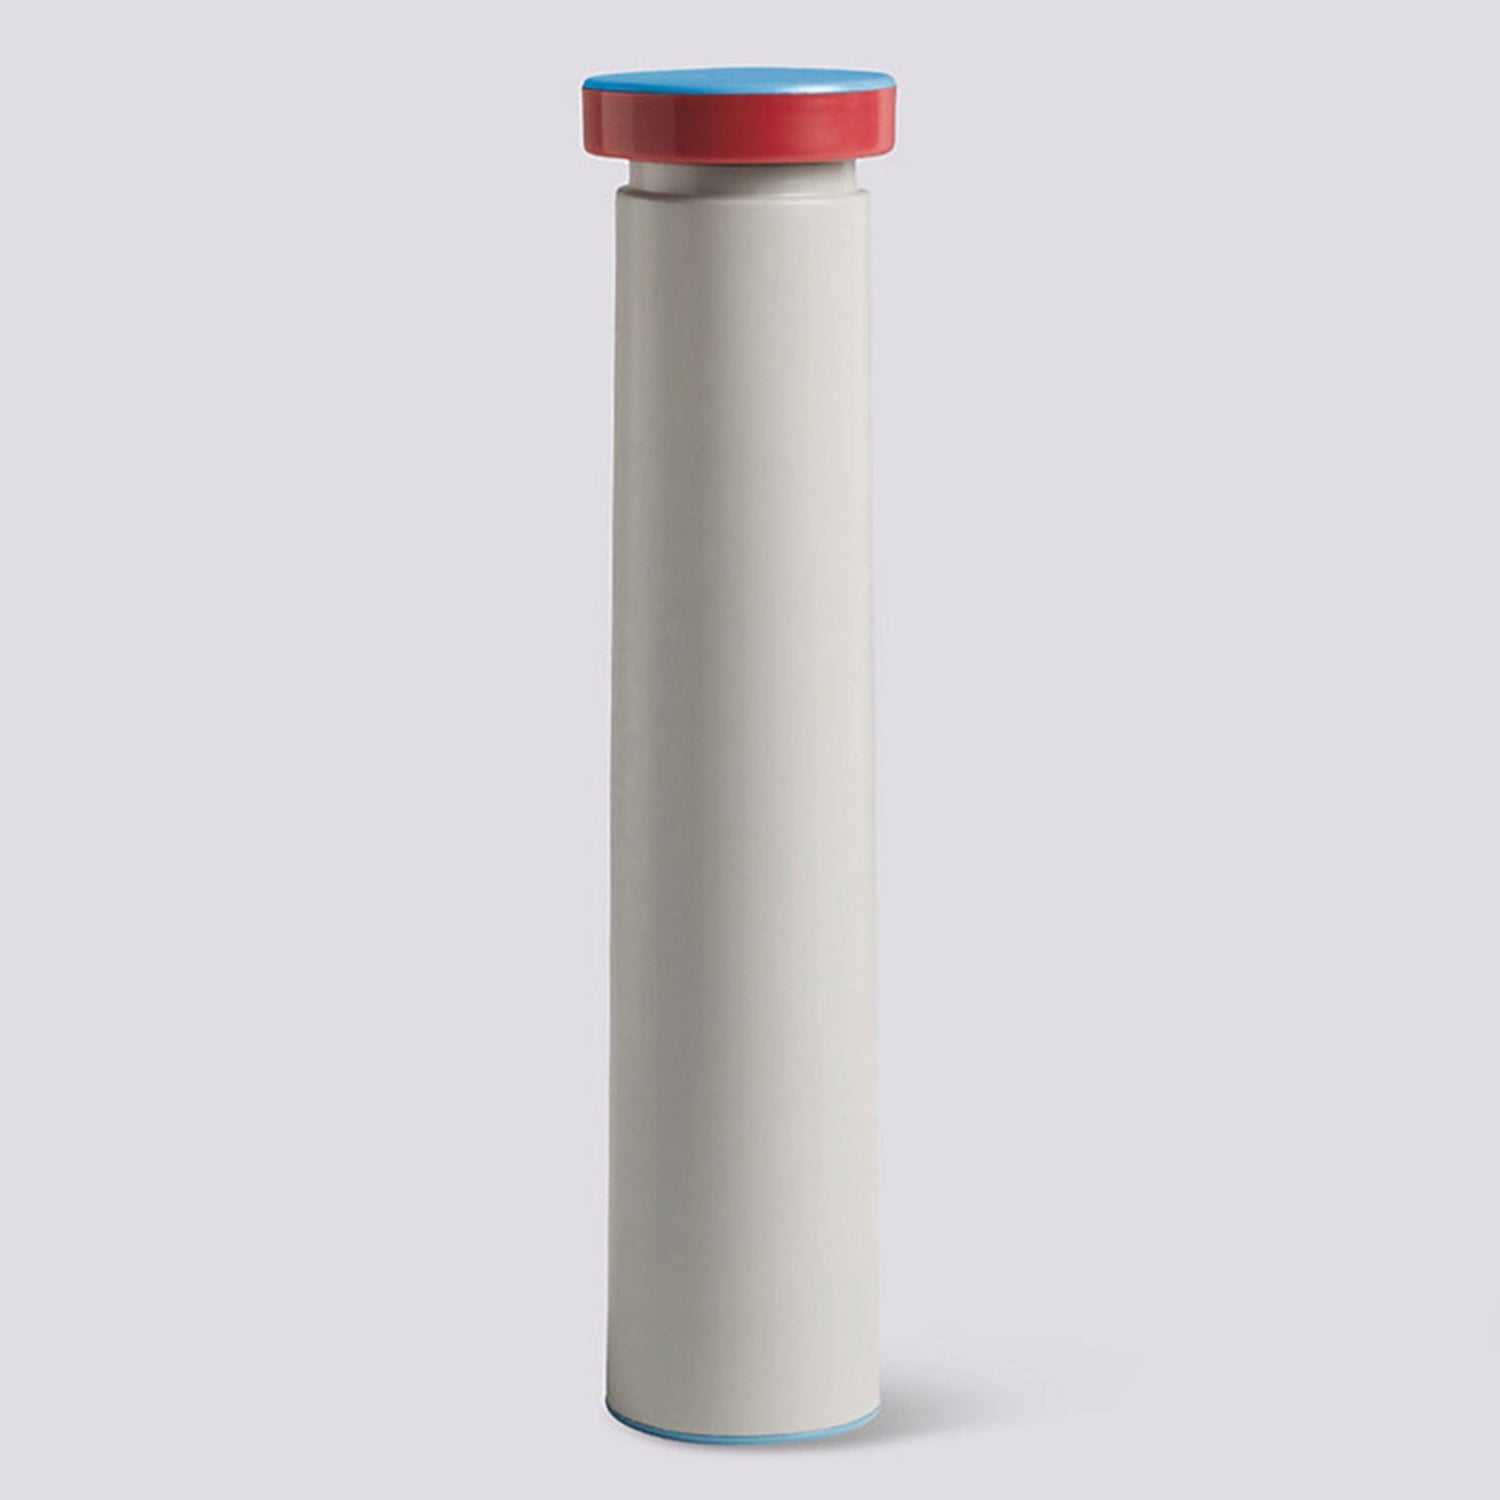 Sowden Salt & Pepper Shaker in grey from HAY brand. Available at Easy Tiger Goods Toronto.